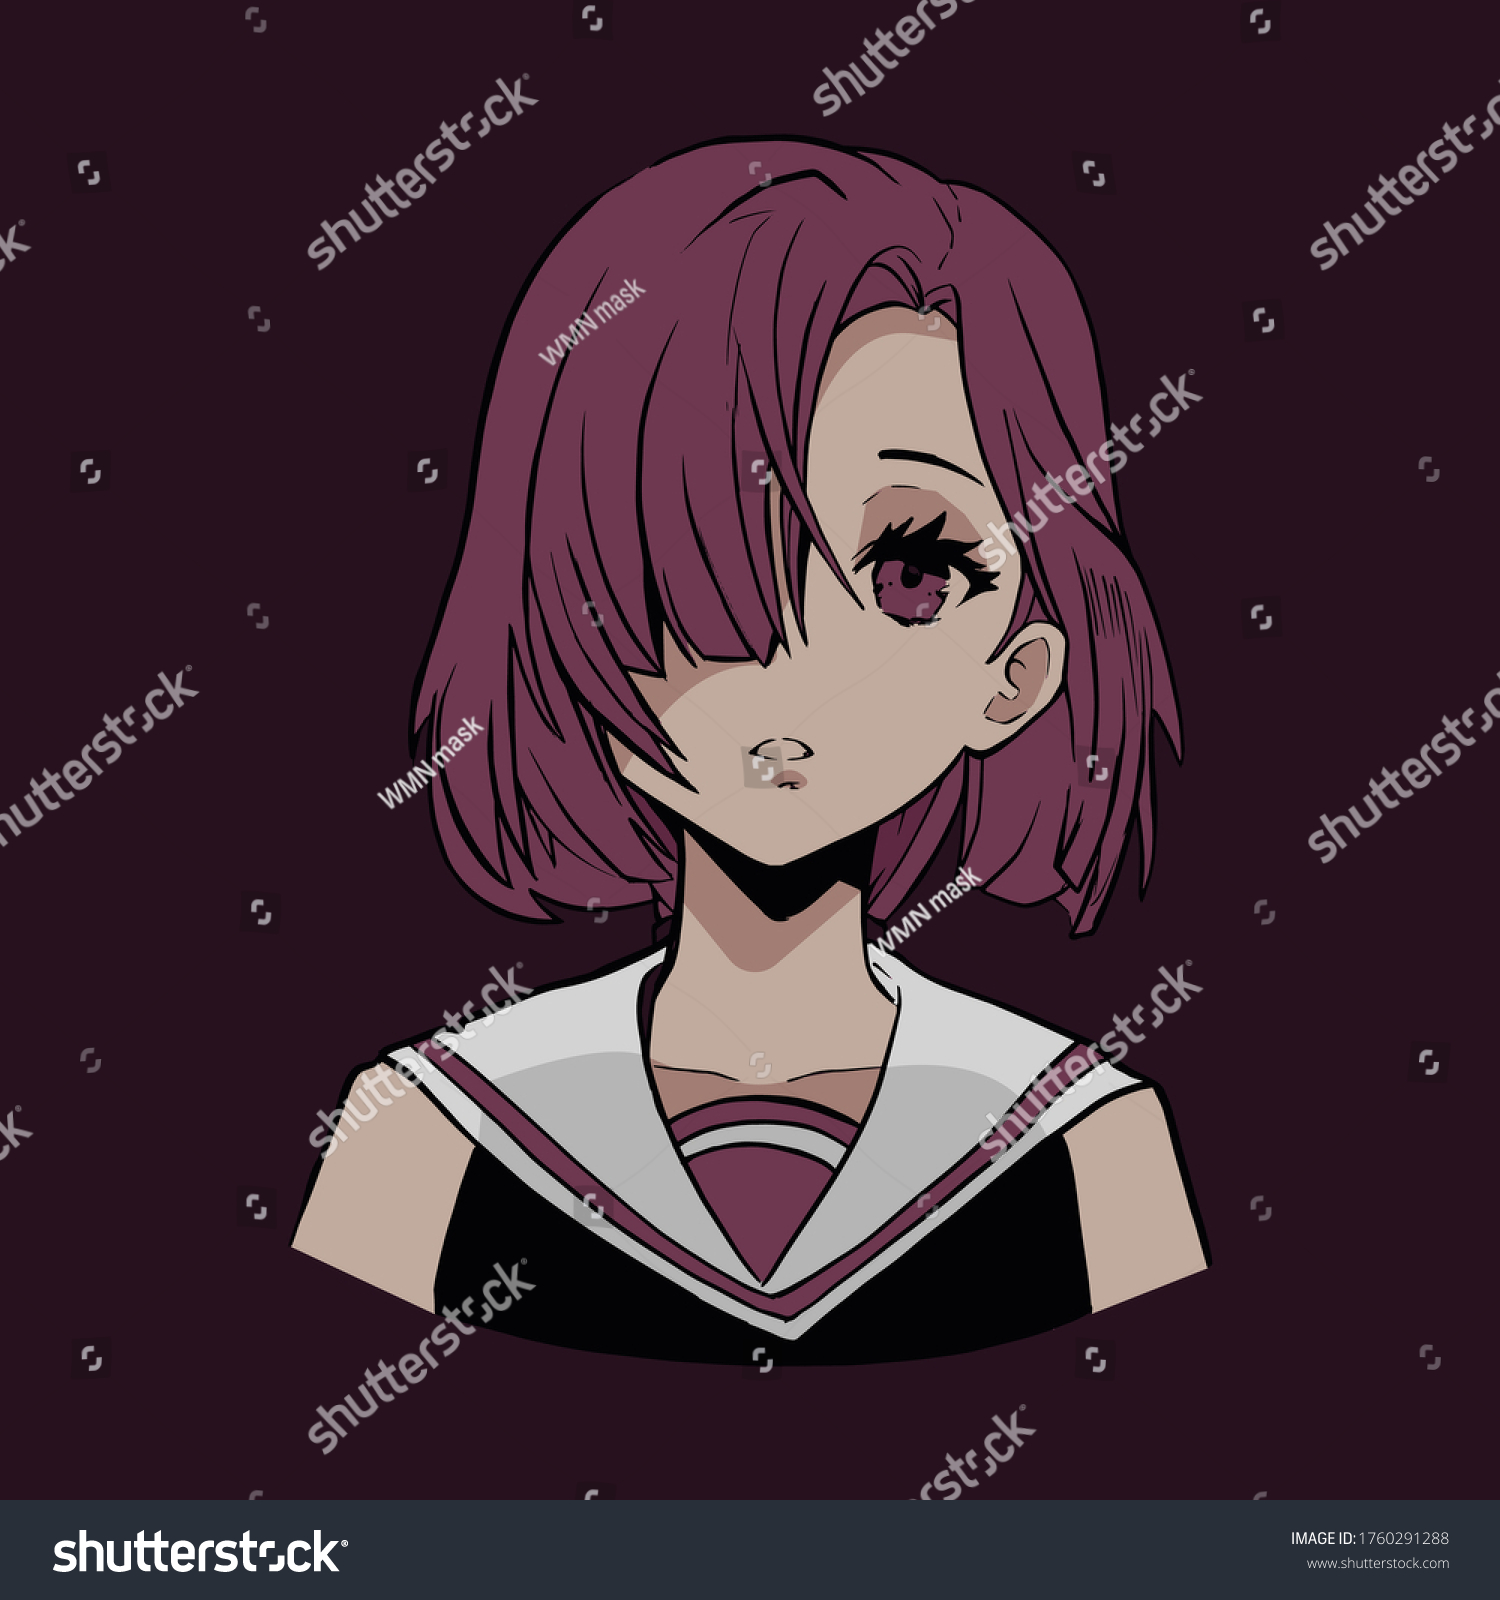 Illustration Vector Graphic Shorthaired Anime Characters Stock Vector Royalty Free 1760291288